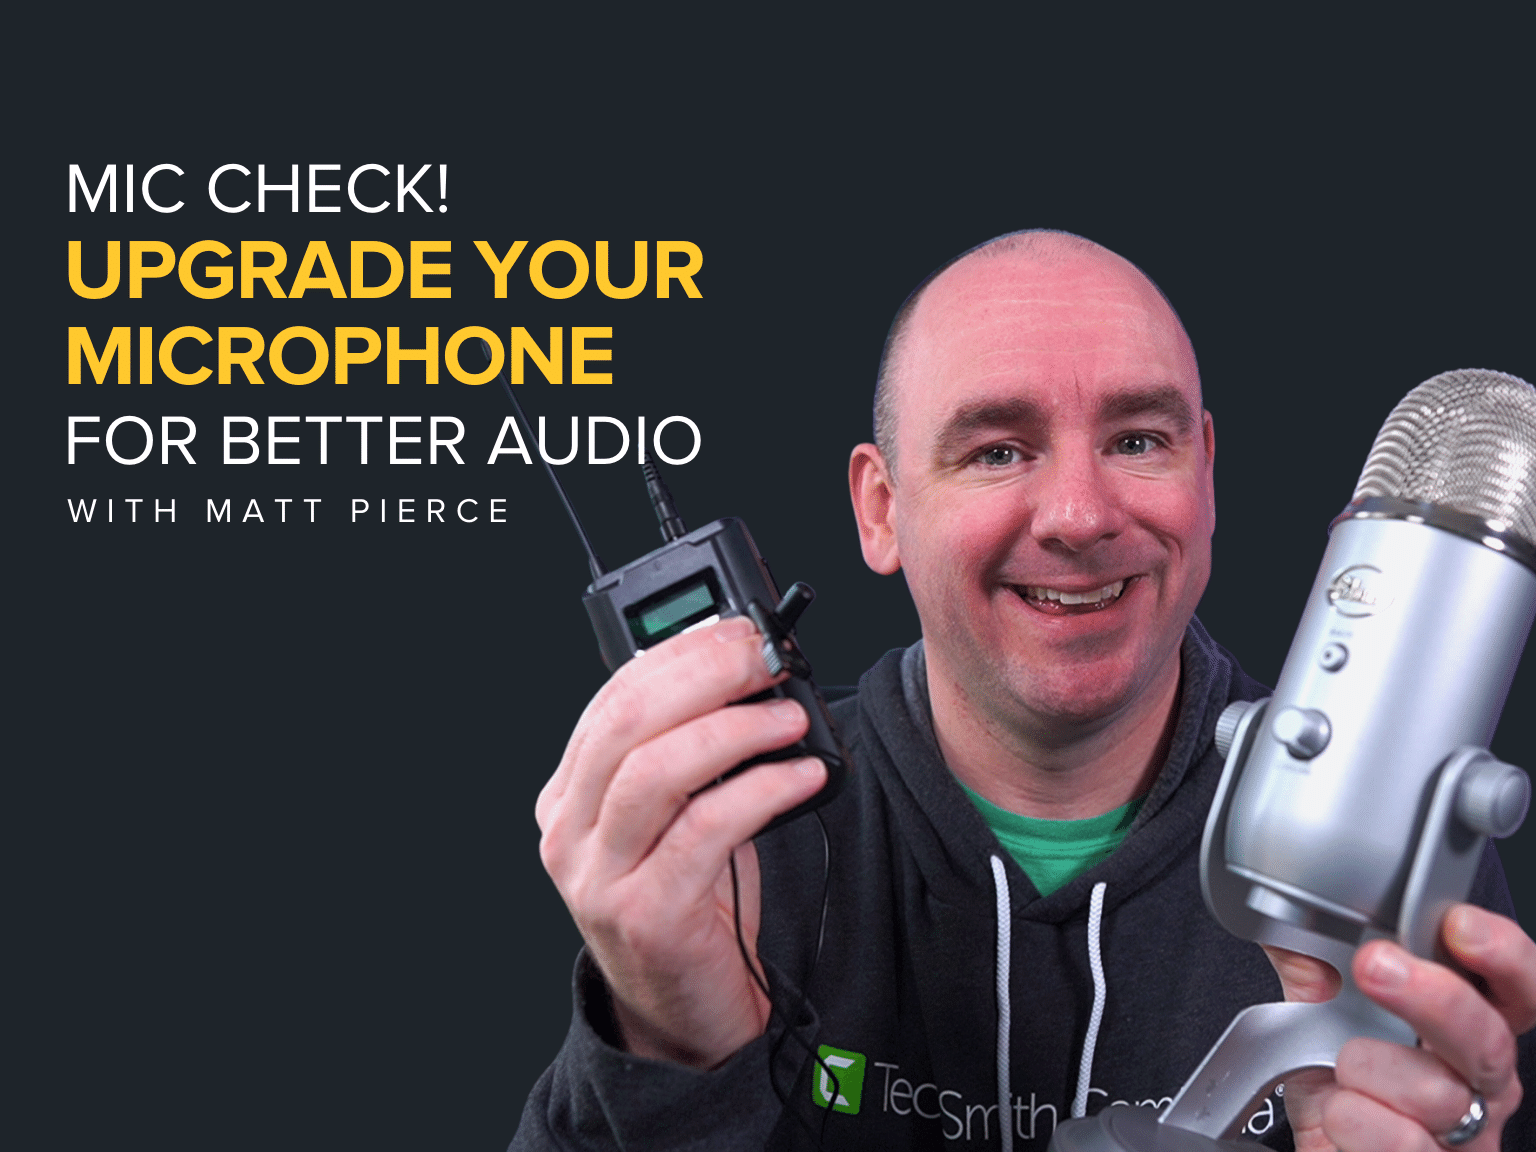 Mic Check! Upgrade Your Microphone for Better Audio